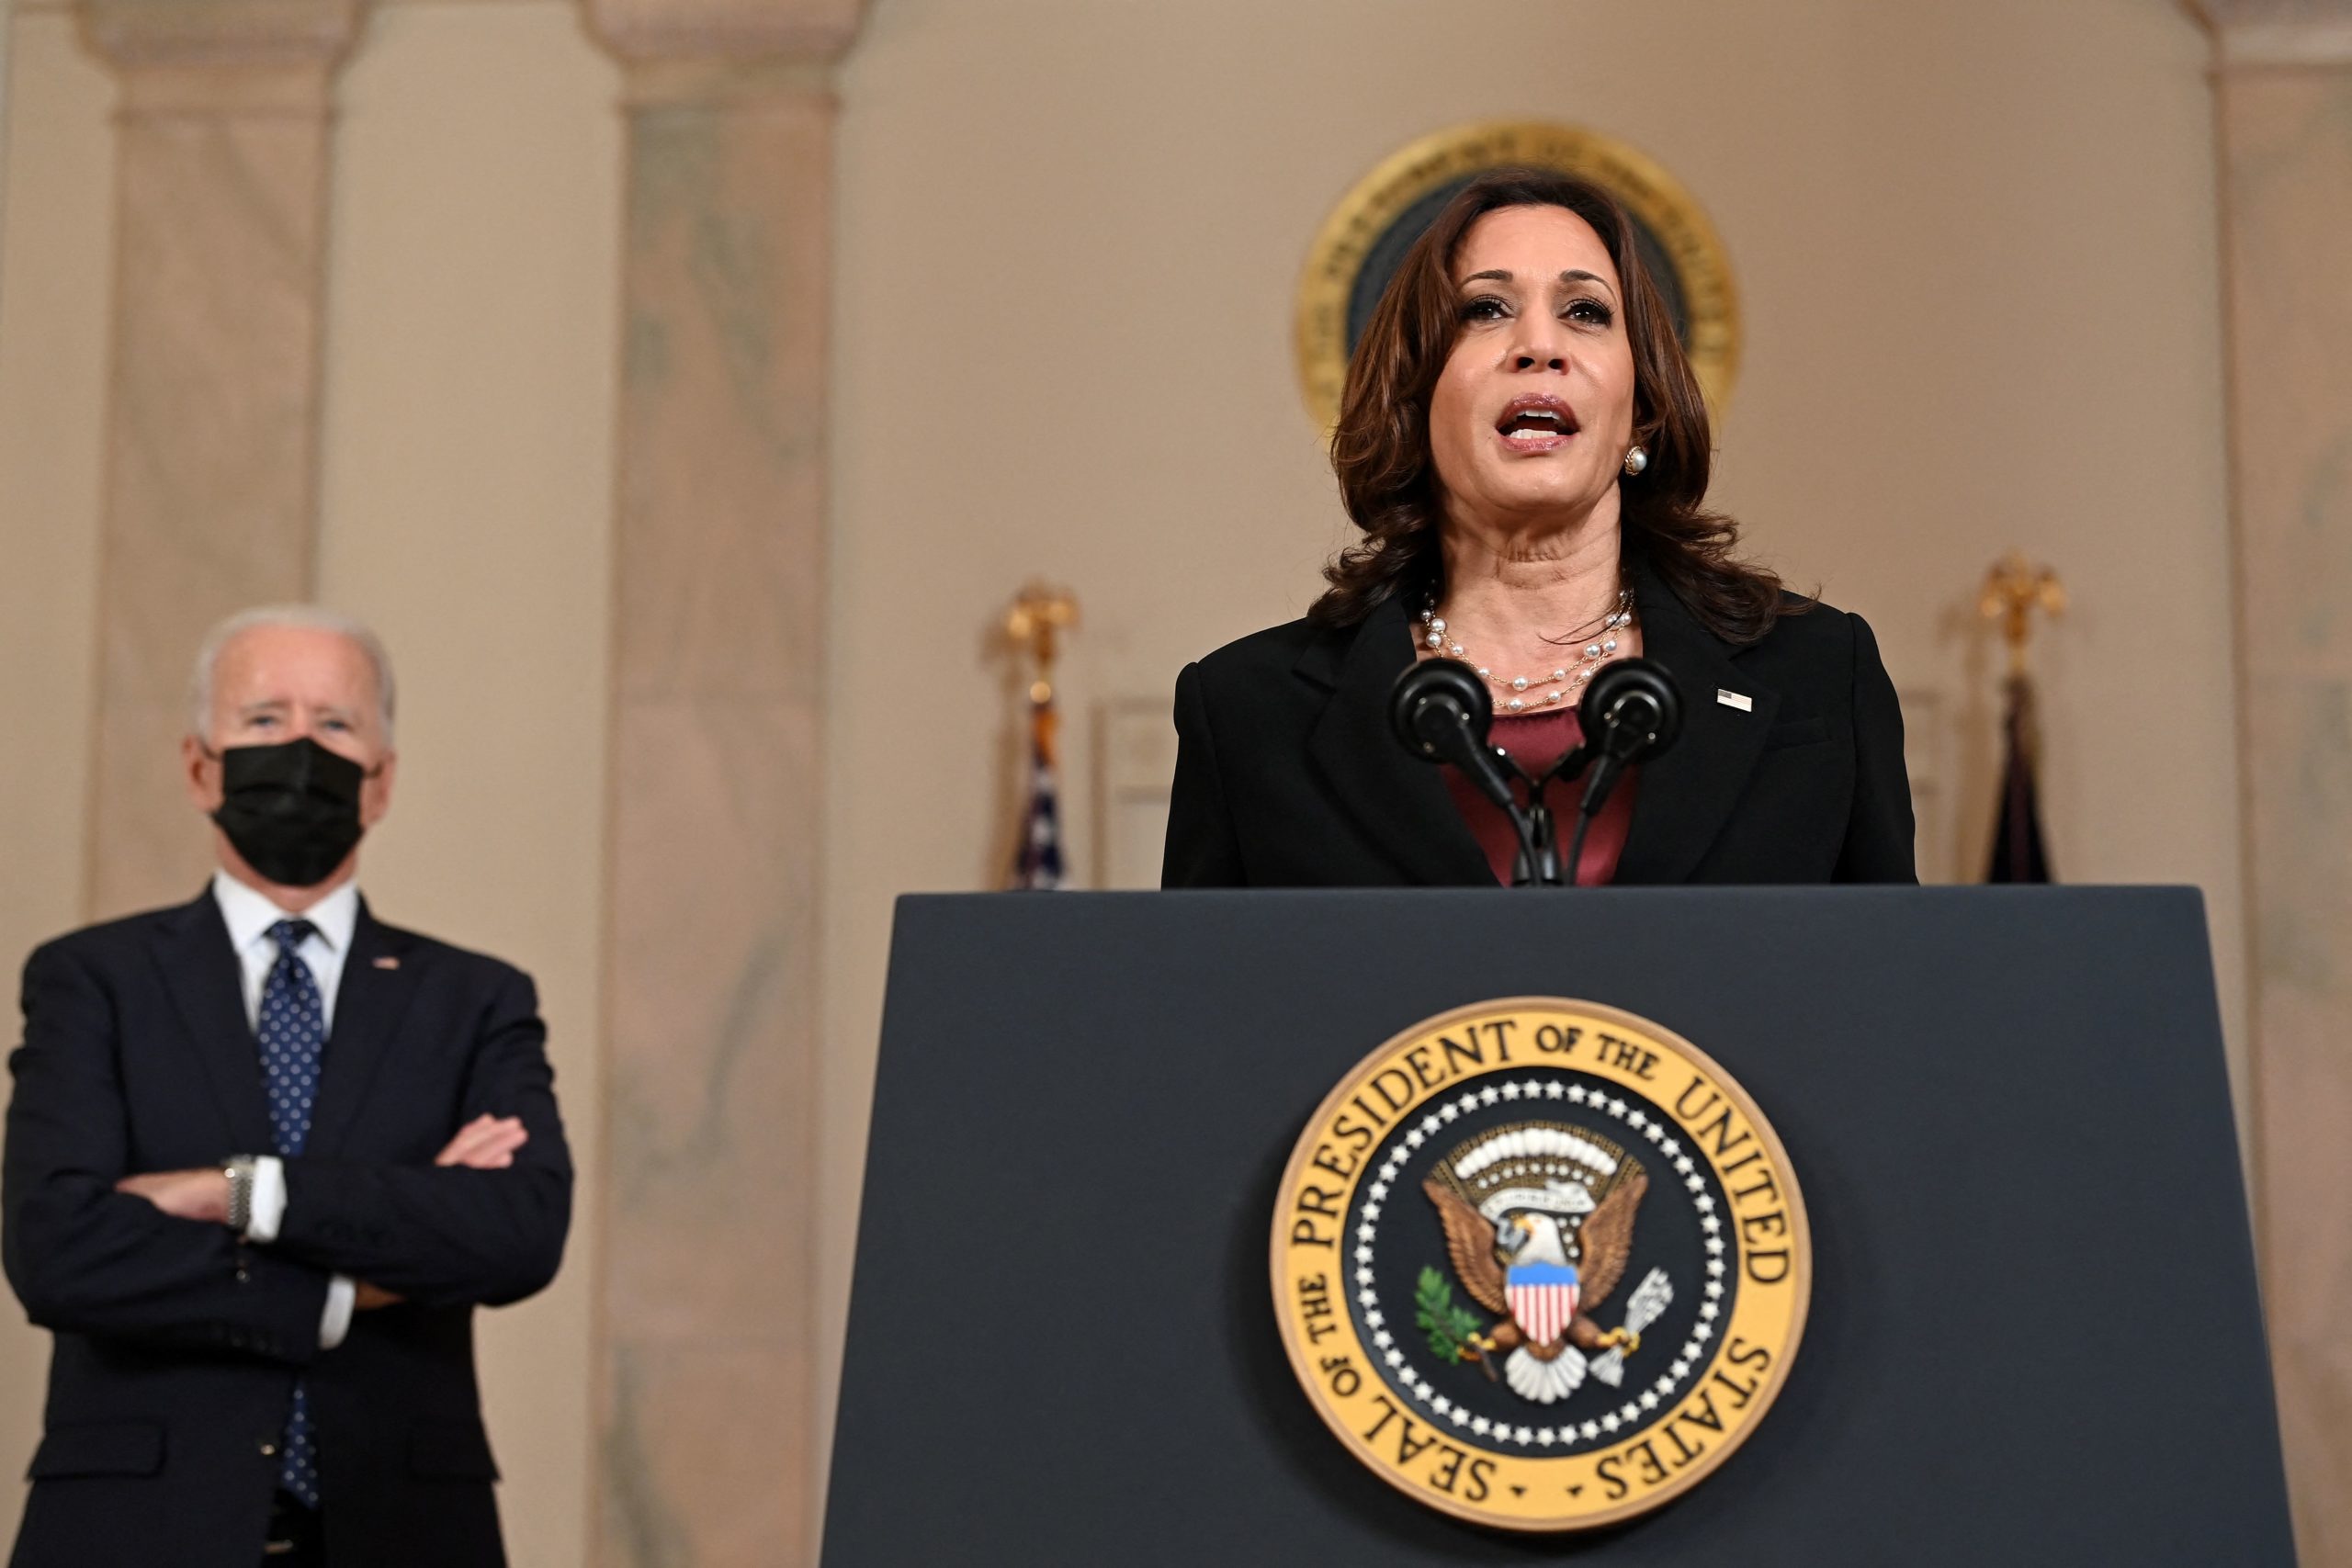 US President Joe Biden (L) listens as Vice President Kamala Harris delivers remarks on the guilty verdict against former policeman Derek Chauvin at the White House in Washington, DC, on April 20, 2021. - Derek Chauvin, a white former Minneapolis police officer, was convicted on April 20 of murdering African-American George Floyd after a racially charged trial that was seen as a pivotal test of police accountability in the United States. (Photo by Brendan SMIALOWSKI / AFP) (Photo by BRENDAN SMIALOWSKI/AFP via Getty Images)